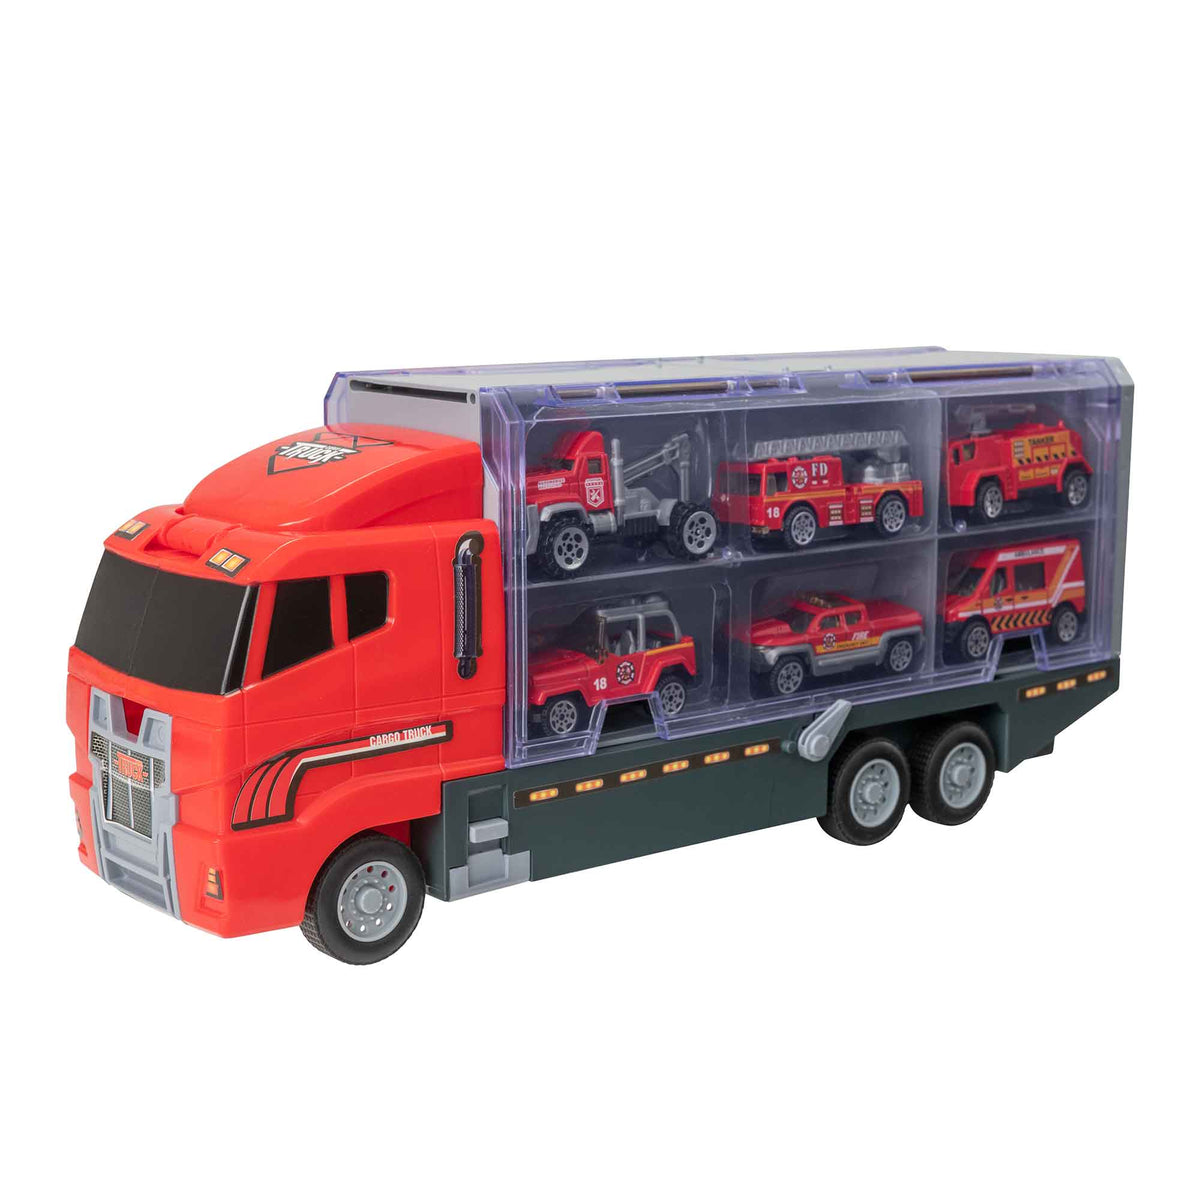 Teamsterz Fire Service Transporter Toy Truck Playset